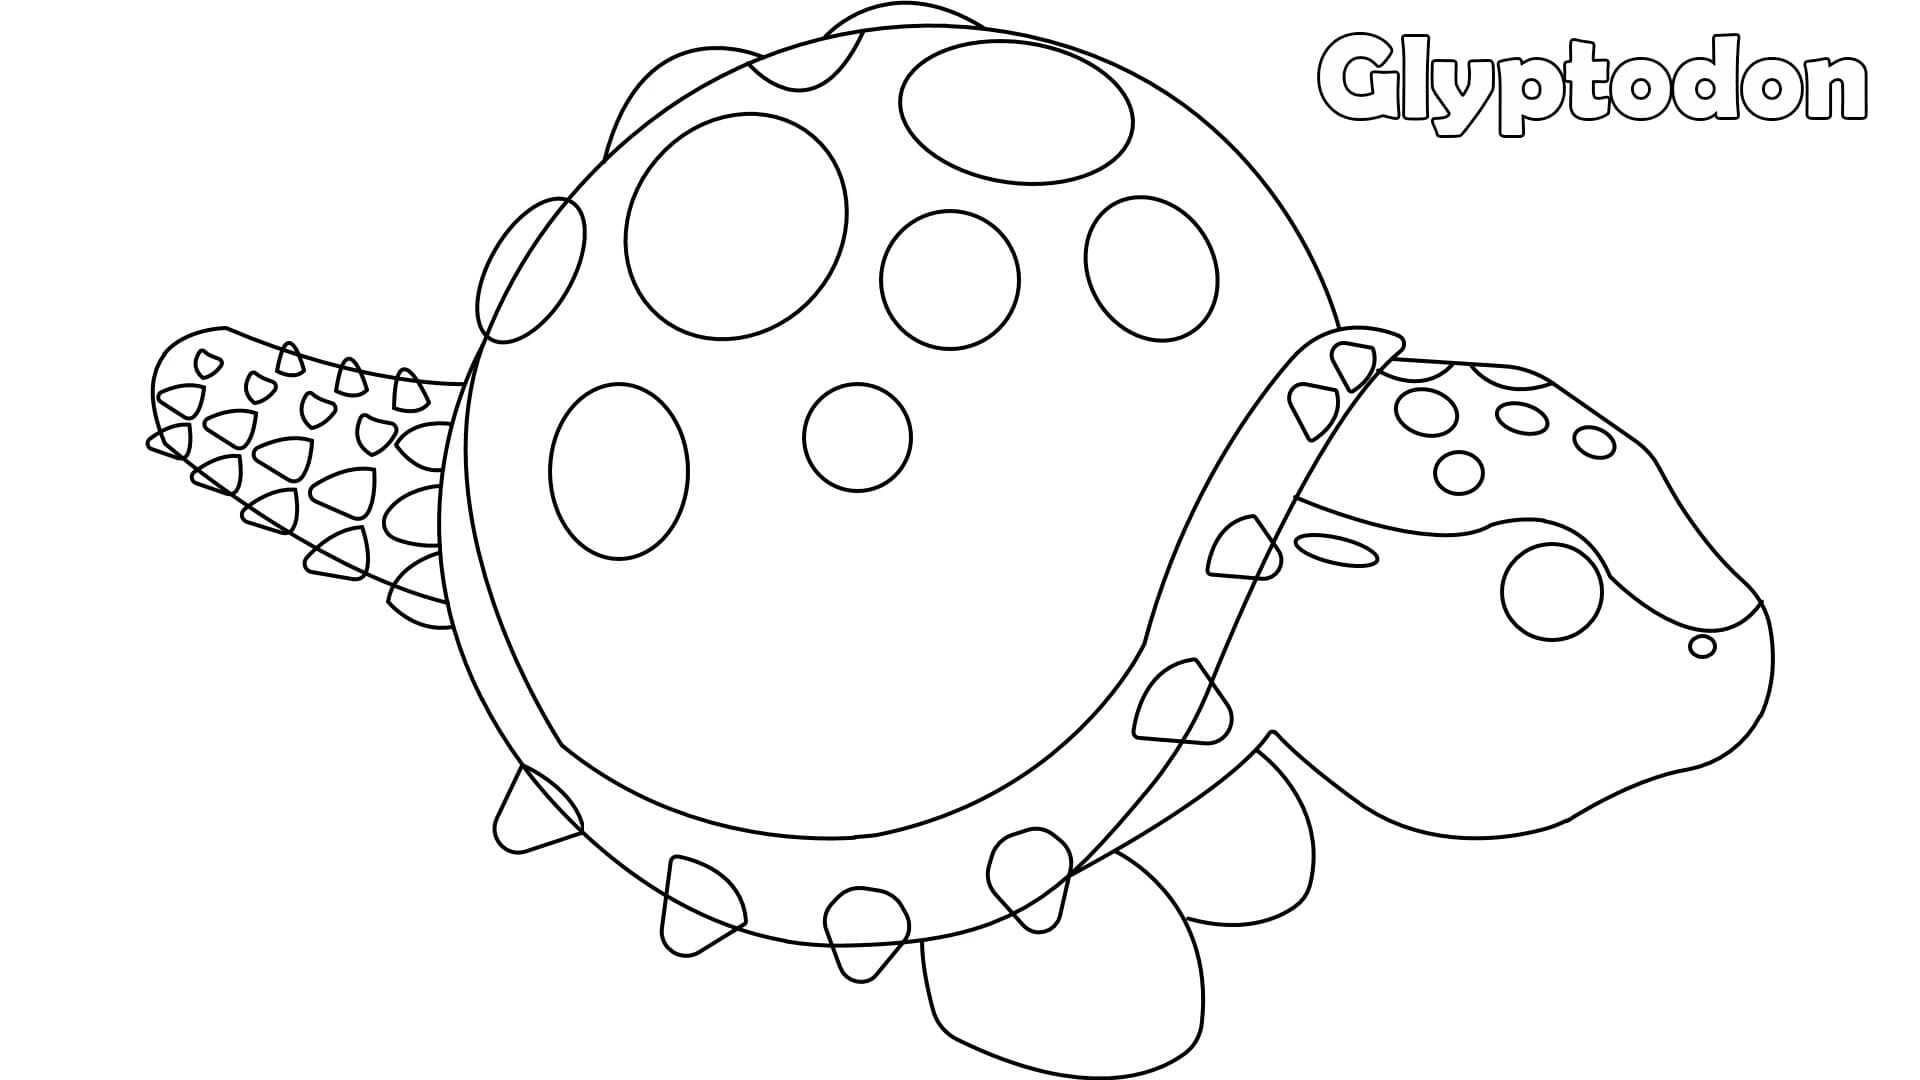 Adopt Me Glyptodon Has Spikes On The Shell Edge And The Tail Coloring Pages